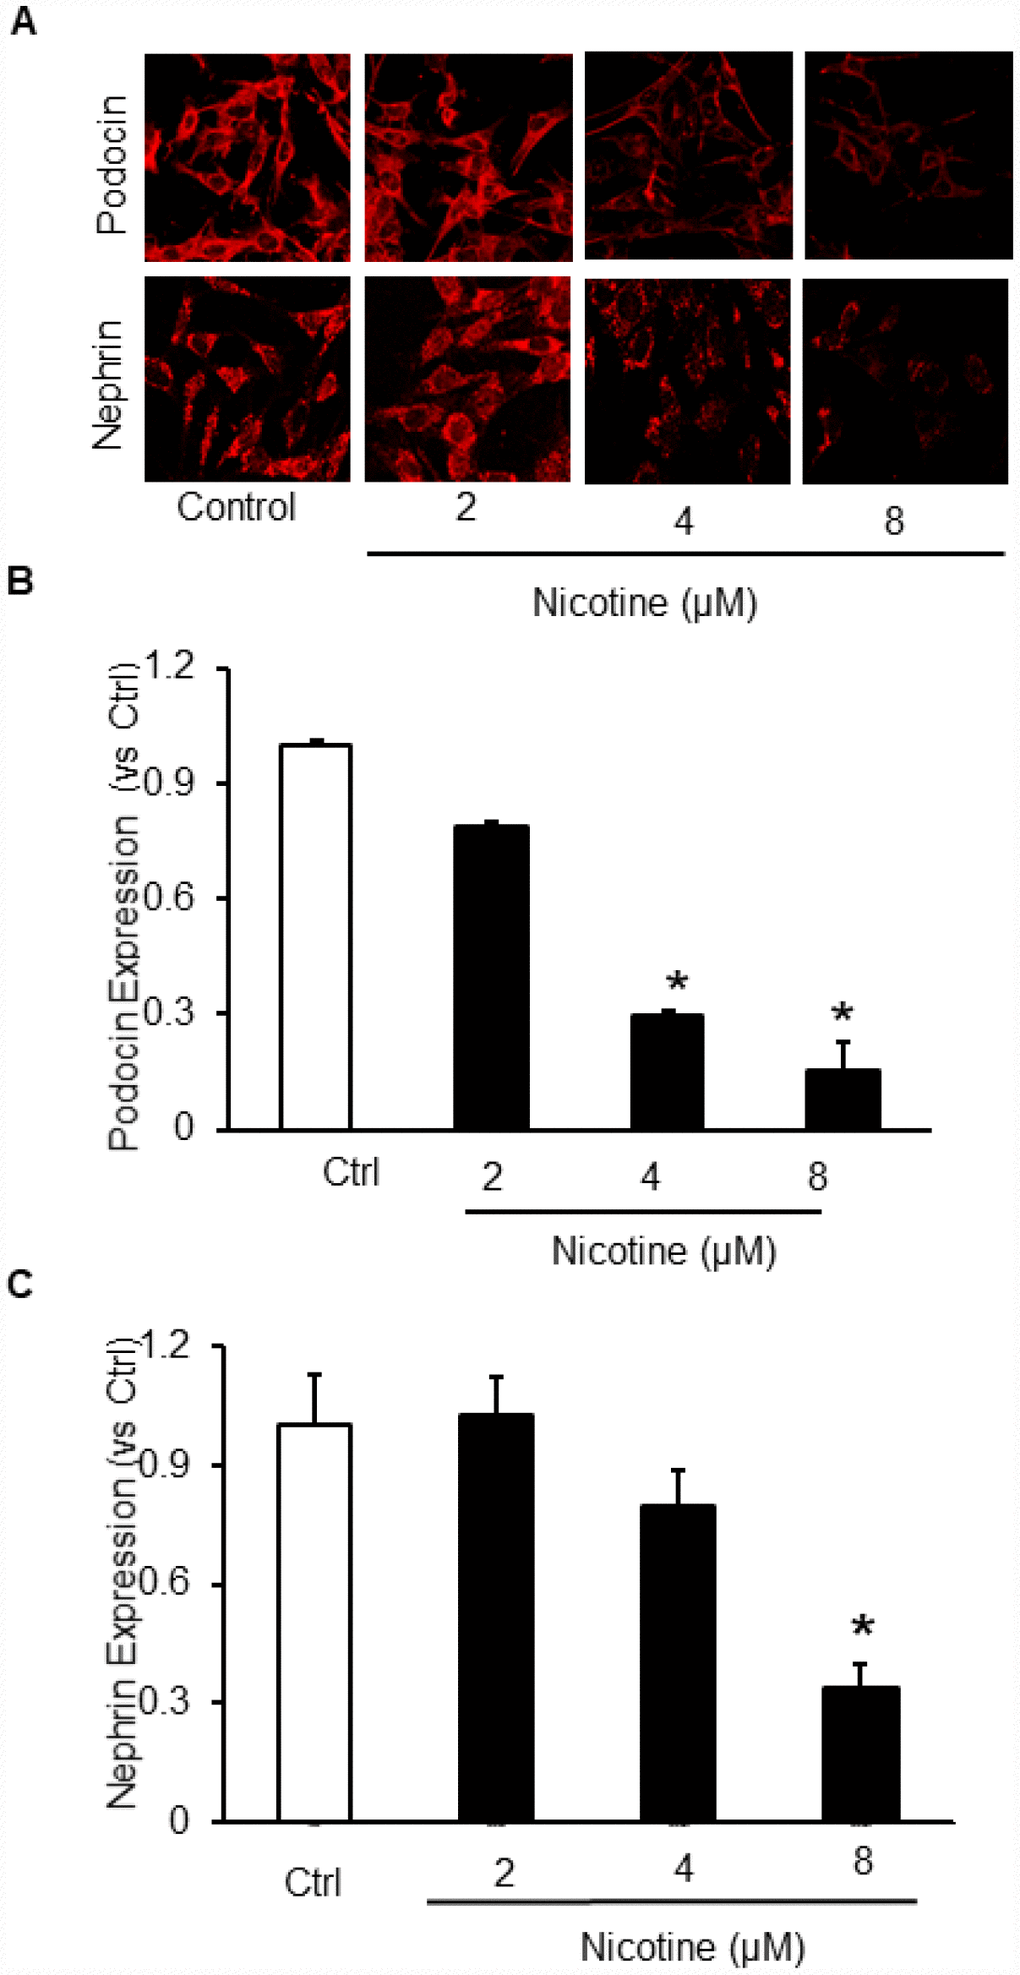 Effect of Nicotine on podocyte injury. Representative immunofluorescence images (A) and summarized quantification data shows Podocin (B) and Nephrin (C) expression in podocytes treated with different concentrations of Nicotine (2μM, 4μM, 8μM). Images were quantified using Image J software. N=5. * Significant difference from control.